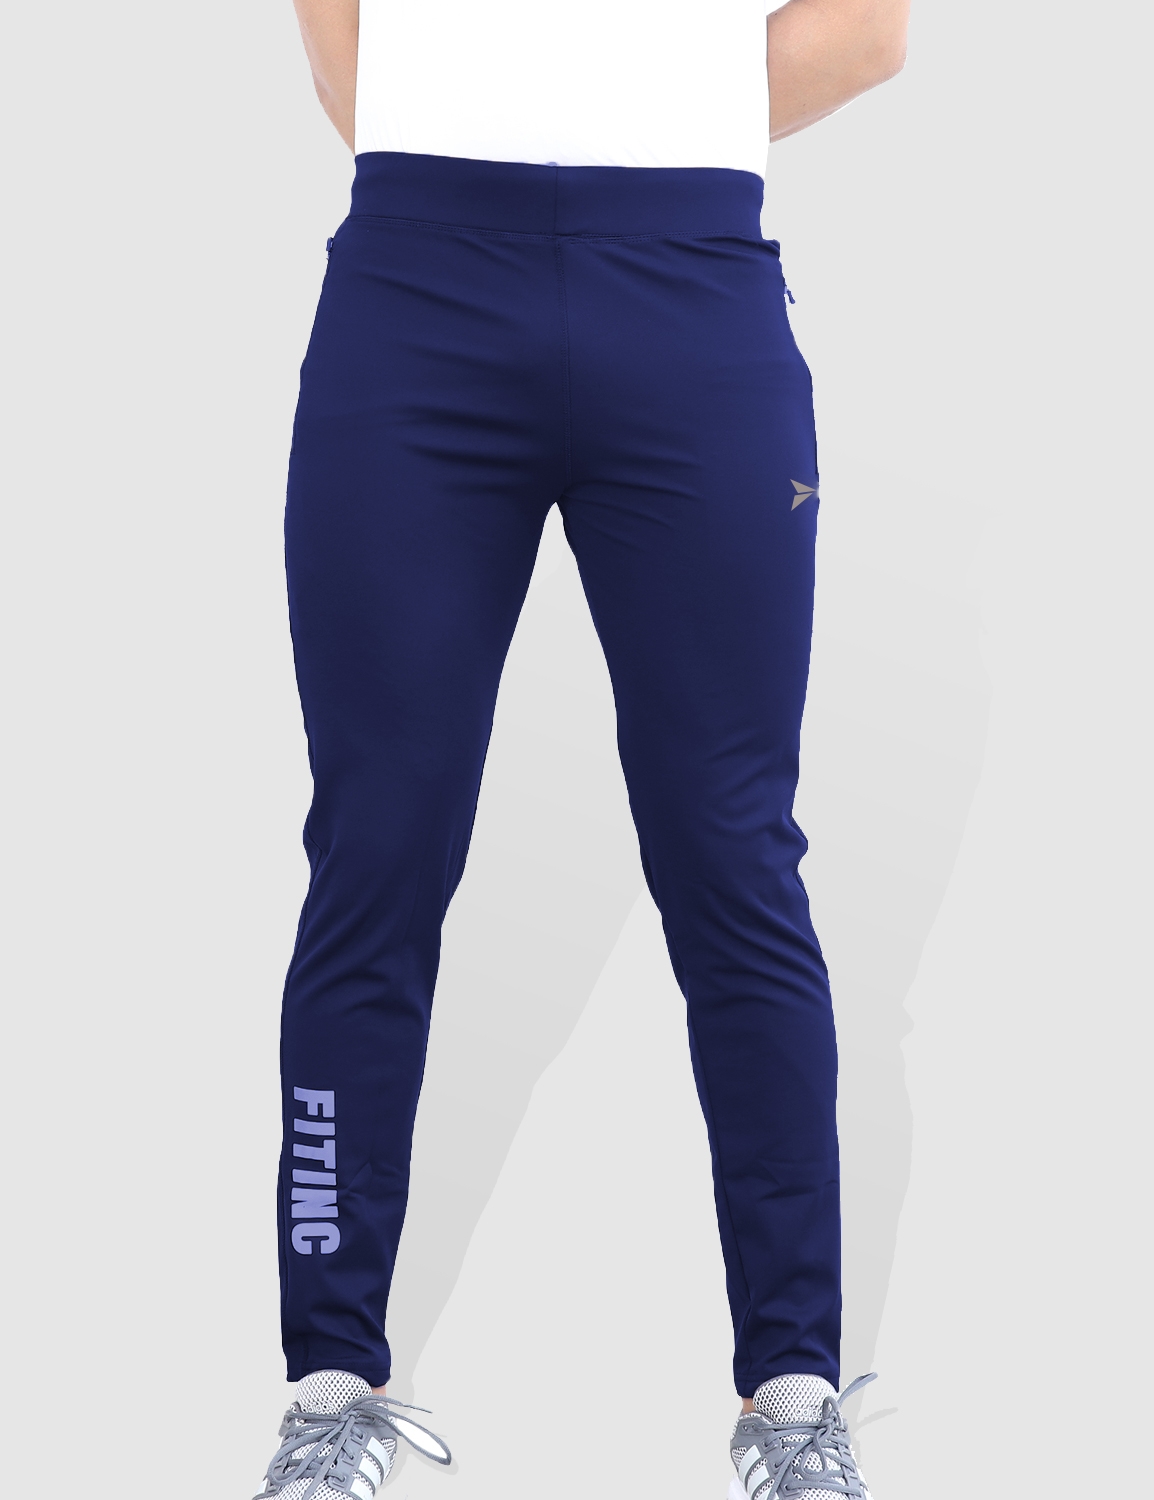 Fitinc Slim Fit Airforce Track Pant for Gym & Yoga with Zipper Pockets